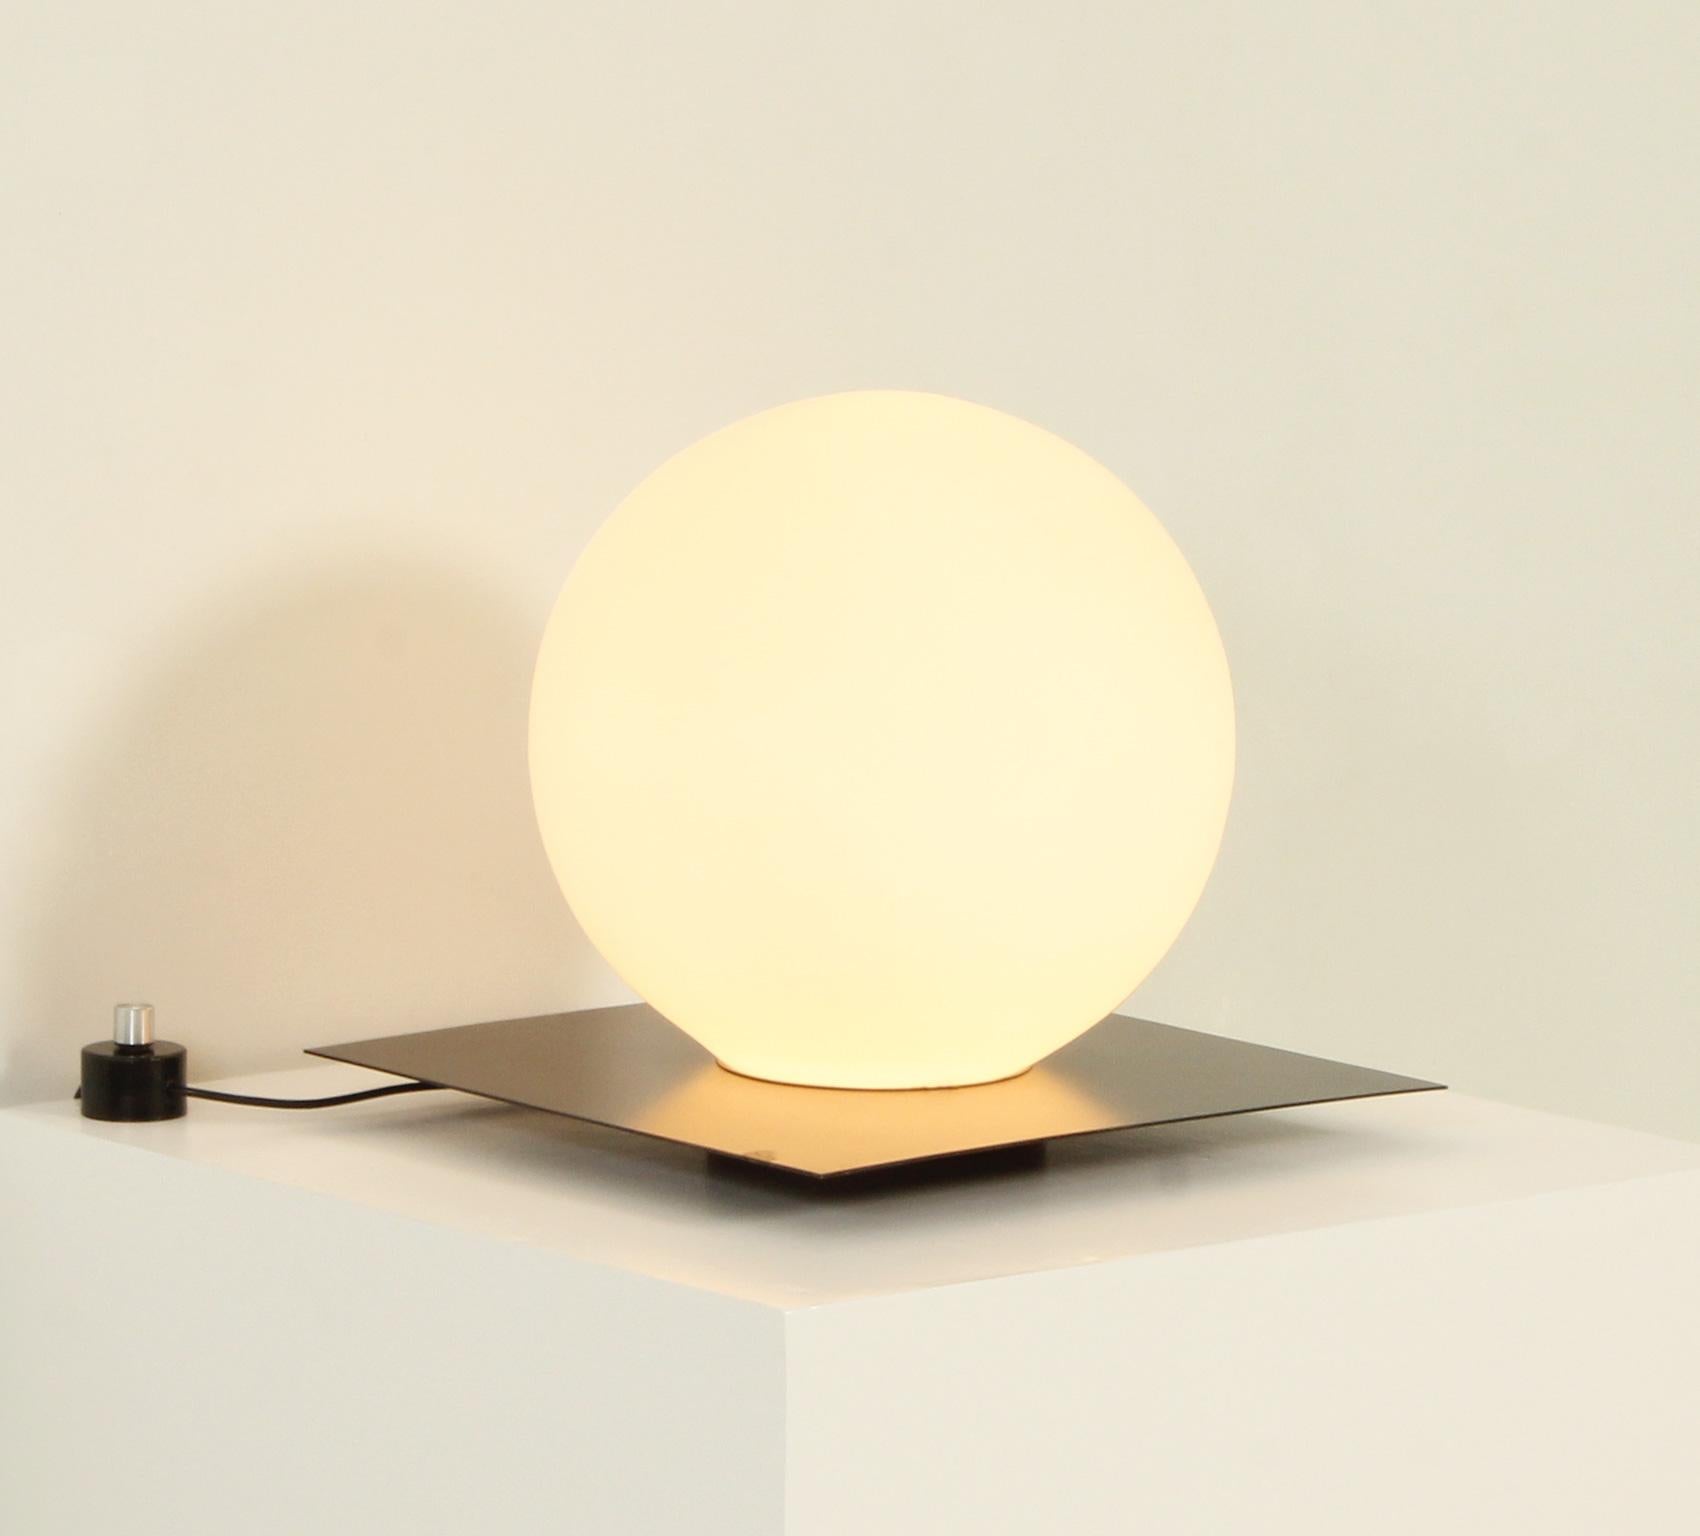 Large table lamp produced by Carpyen, Spain, 1970s. Minimal design with a black metal base and opal glass globe supported at the base. Light intensity can be regulated.